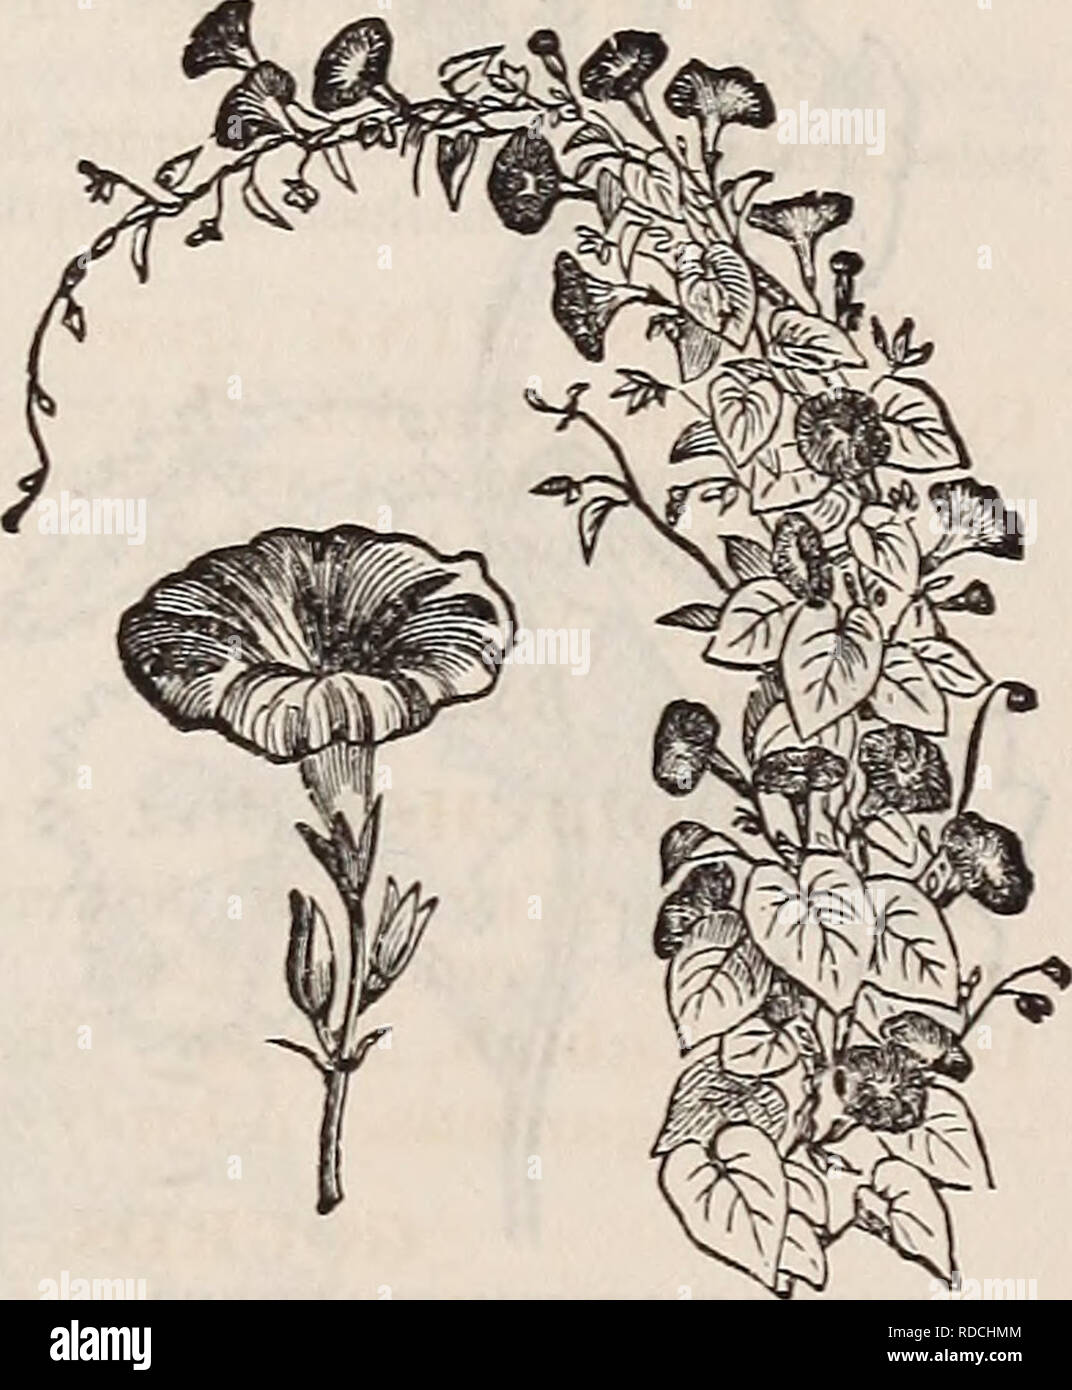 . E. Fred Washburn's amateur cultivator's guide to the flower &amp; kitchen garden for 1880. Nursery stock Massachusetts Catalogs; Flowers Seeds Catalogs; Kitchen gardens Catalogs; Vegetables Seeds Catalogs; Fruit Seeds Catalogs. THUNBERGIA AI.ATA (see page 79), IPOM^A VOIitJBILIS (aiADAME AlfNE). NEW IPOM/EAS, WITH SELF-COLORED FOLIAGE. 820 Ipomgea Hederacea Alba Grandiflora Intus Rosea. Handsome white flower, with dark-rose throat 821 Alba Grandiflora Intus Rosea Semi-Plena. Of the same form and color as the foregoing; a serai-double one, which is seldom seen in this family 822 Atrocarminea  Stock Photo